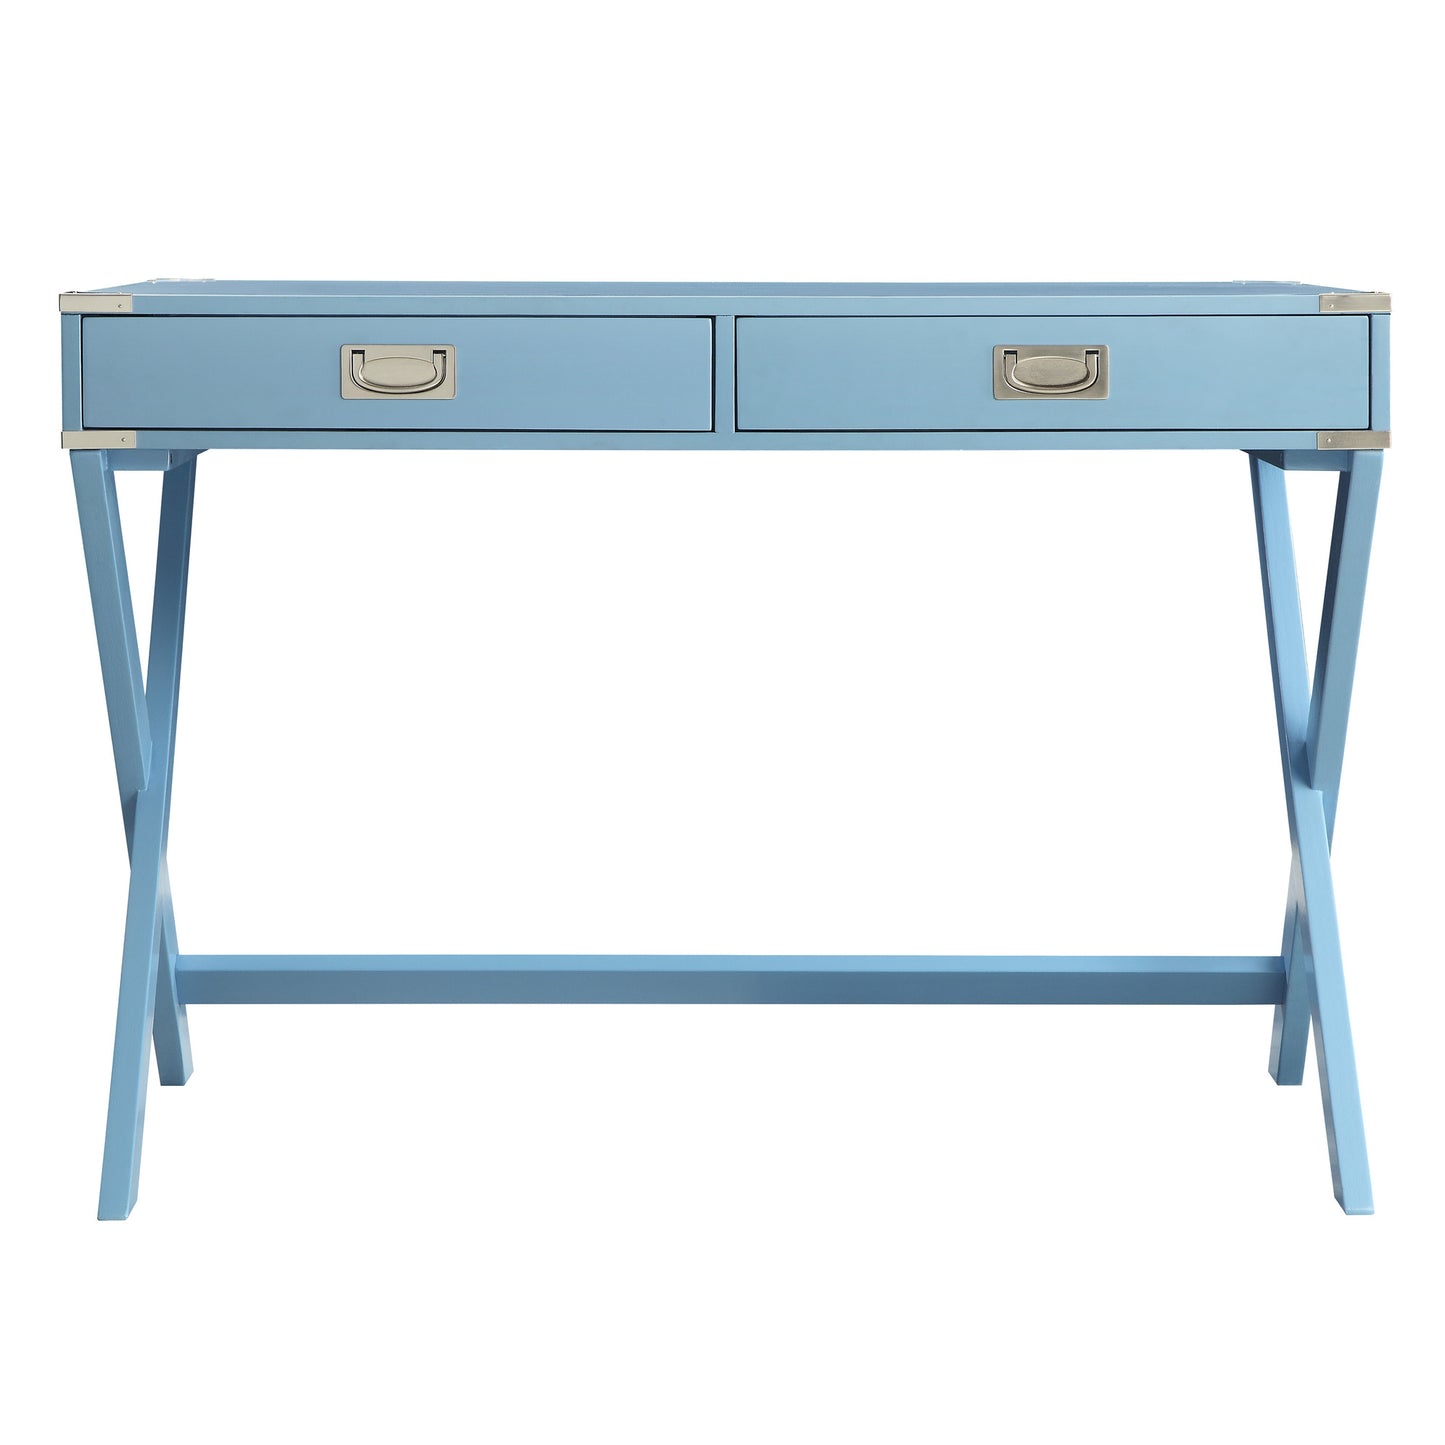 X-Base Wood Accent Campaign Writing Desk - Blue